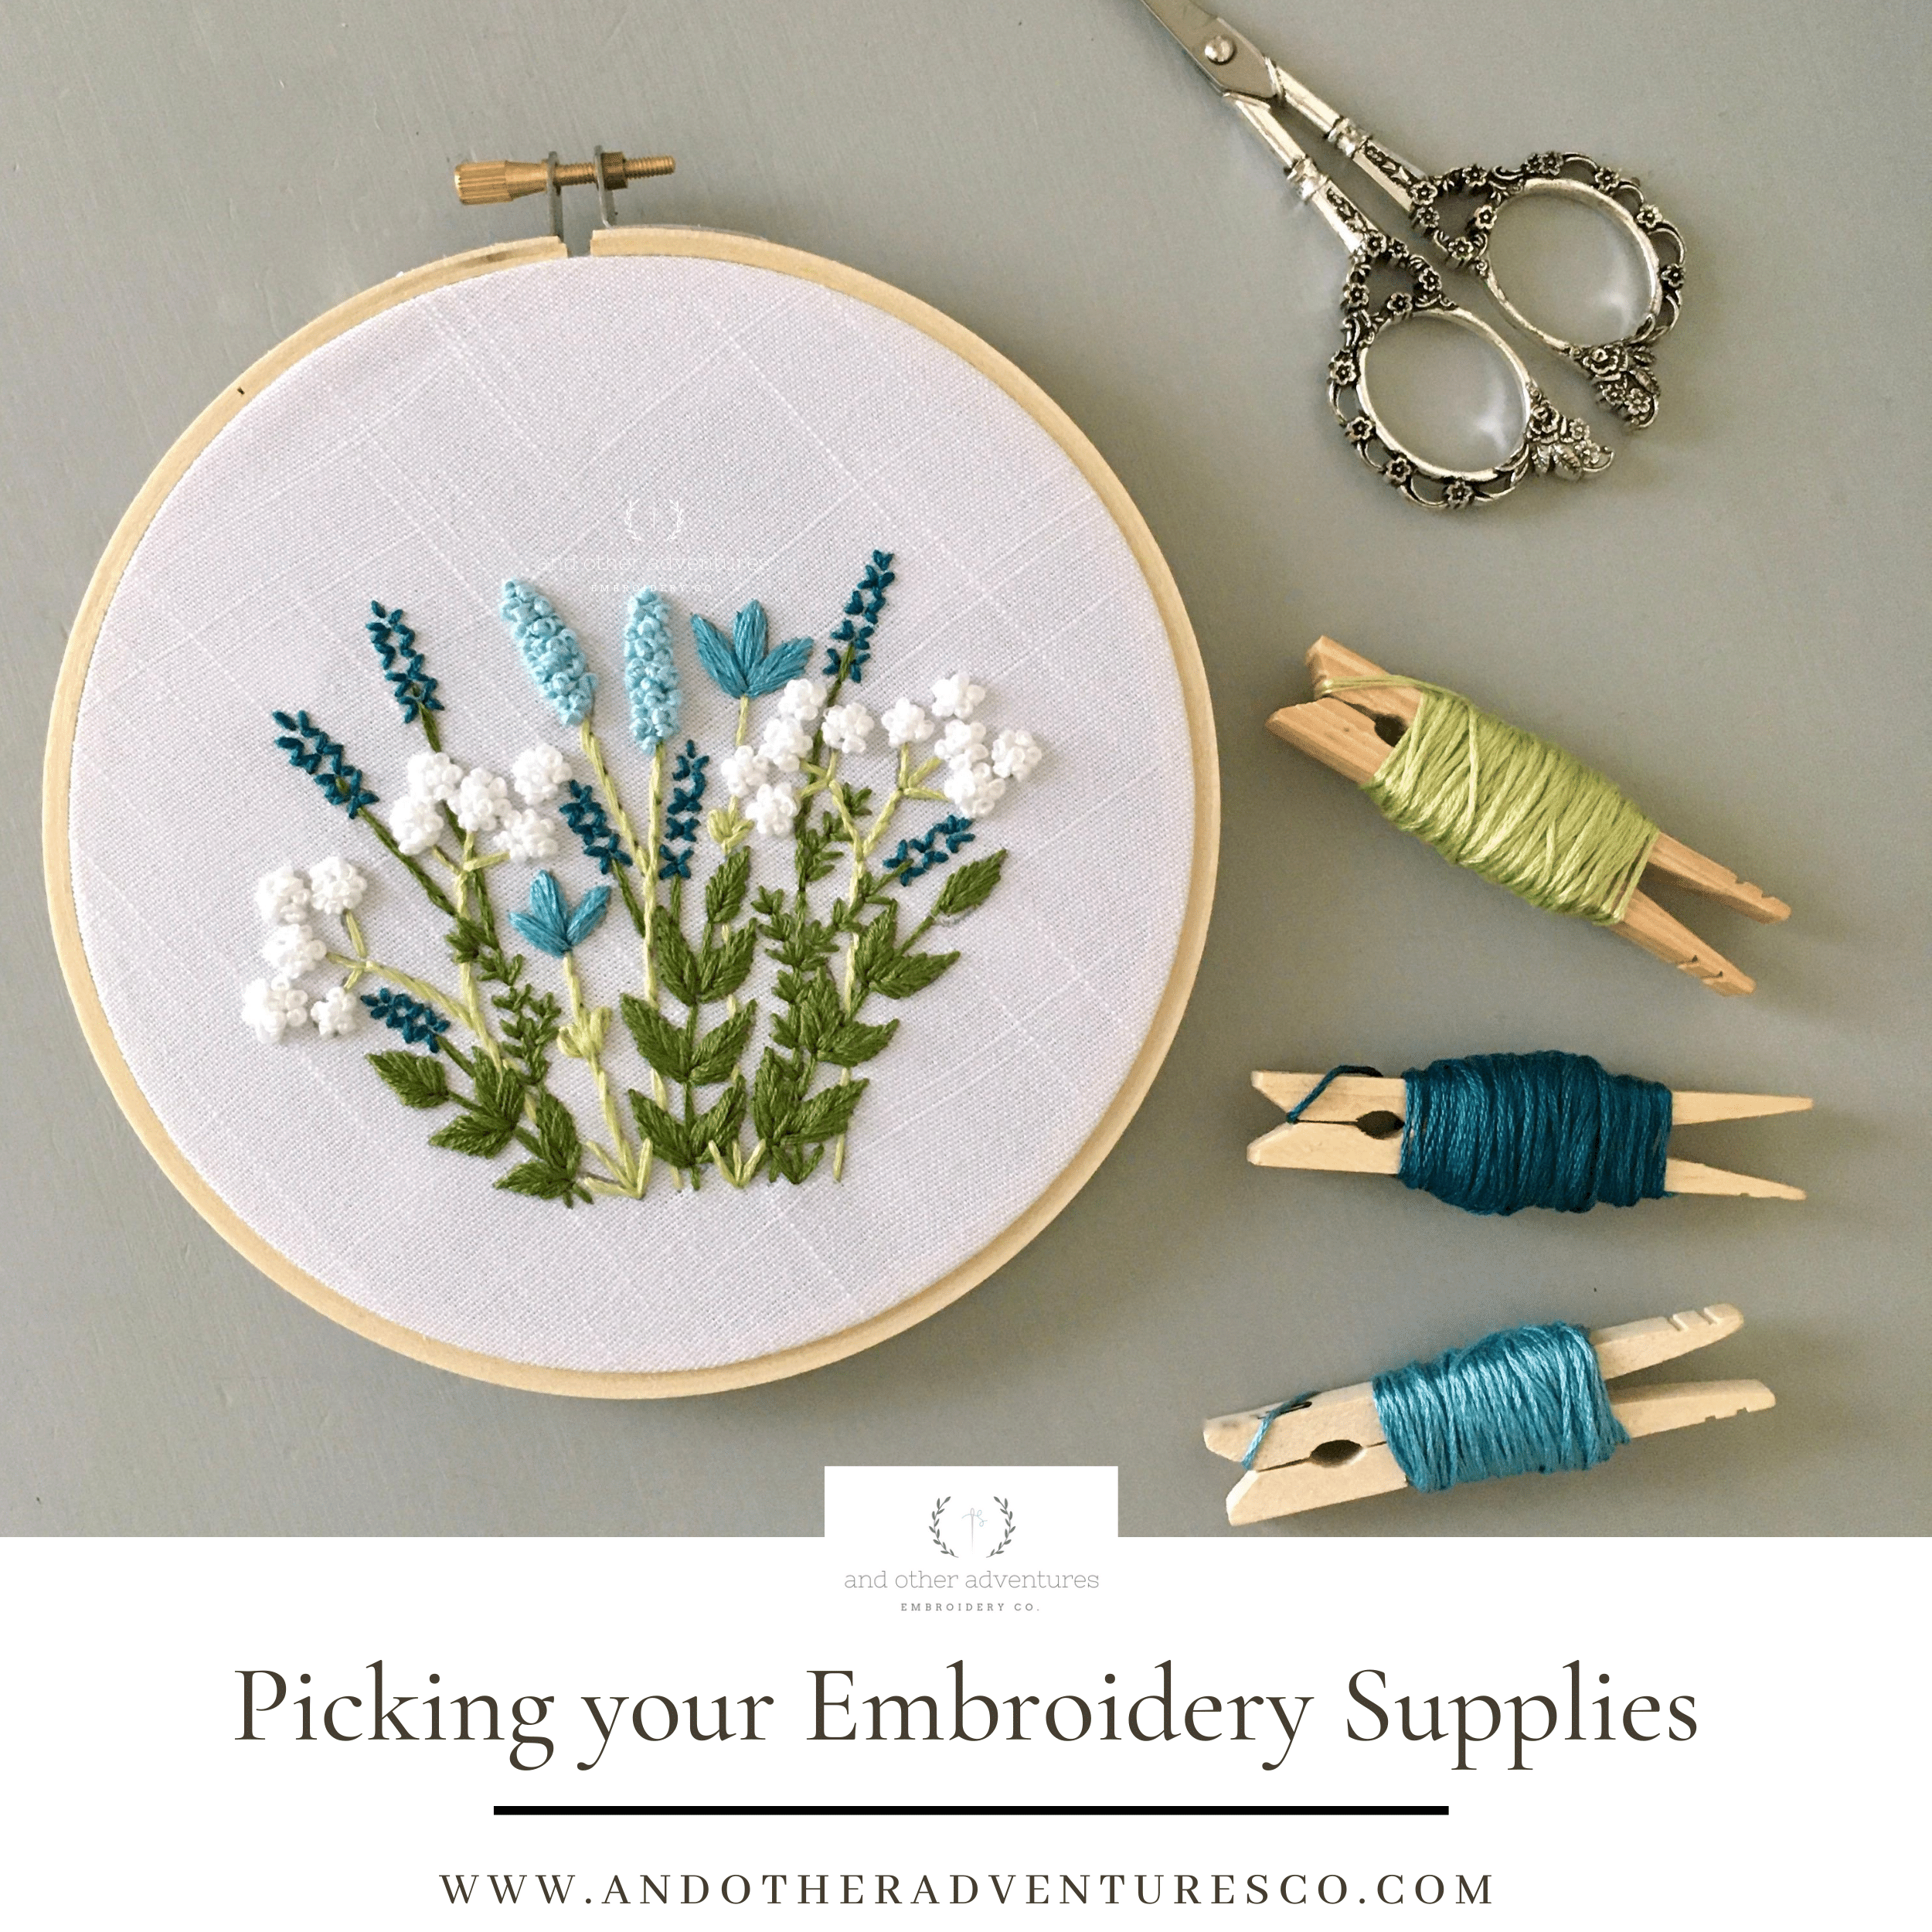 Picking your Embroidery Supplies - And Other Adventures Embroidery Co